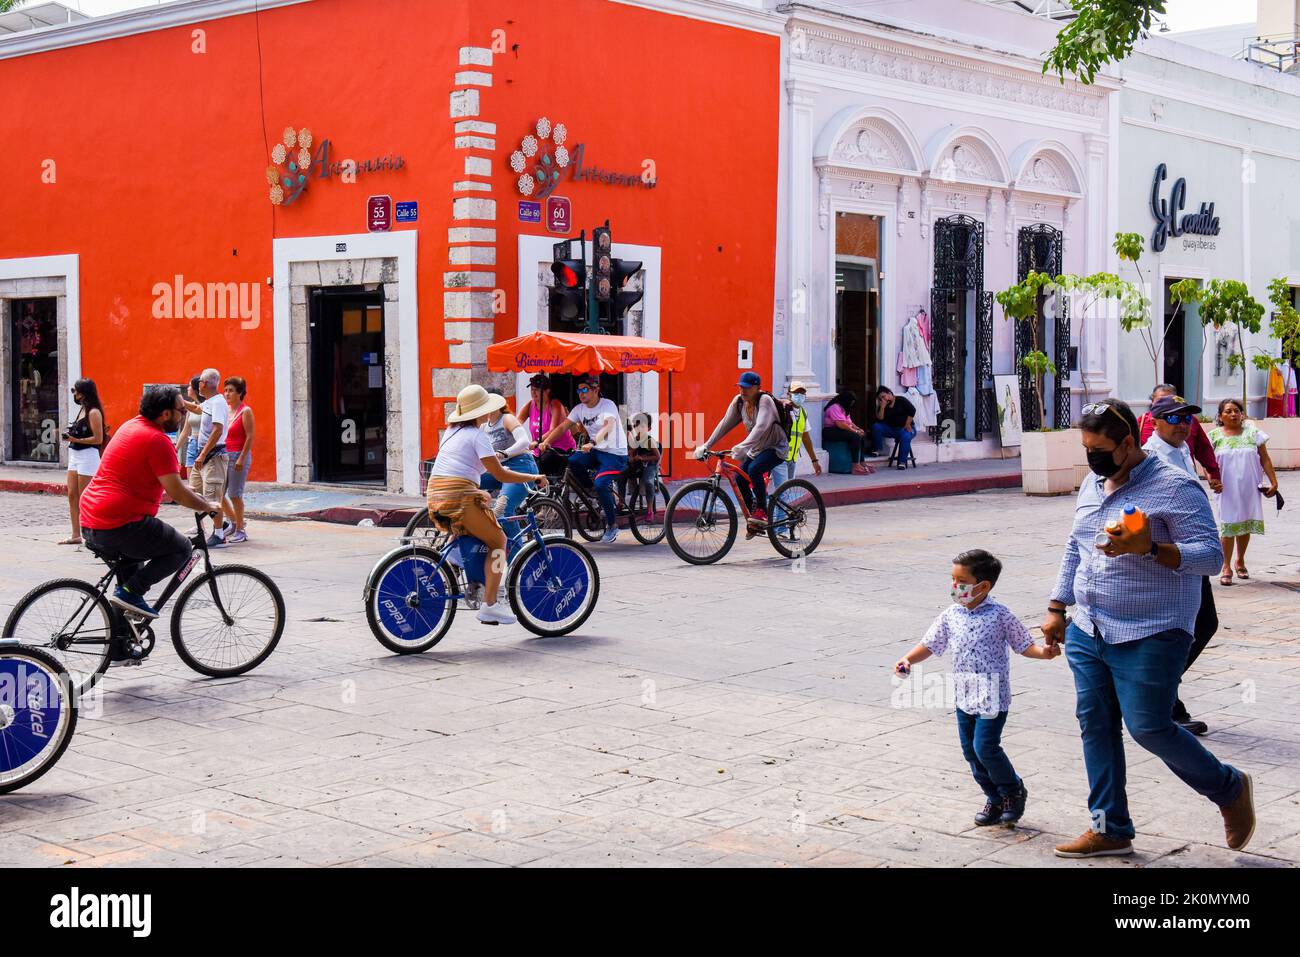 Biciruta is a Sunday traditional community bike ride event where the city closes some streets in the historical center to allow people to ride bicycles and enjoy outdoor activities, Merida, Yucatan, Mexico Stock Photo